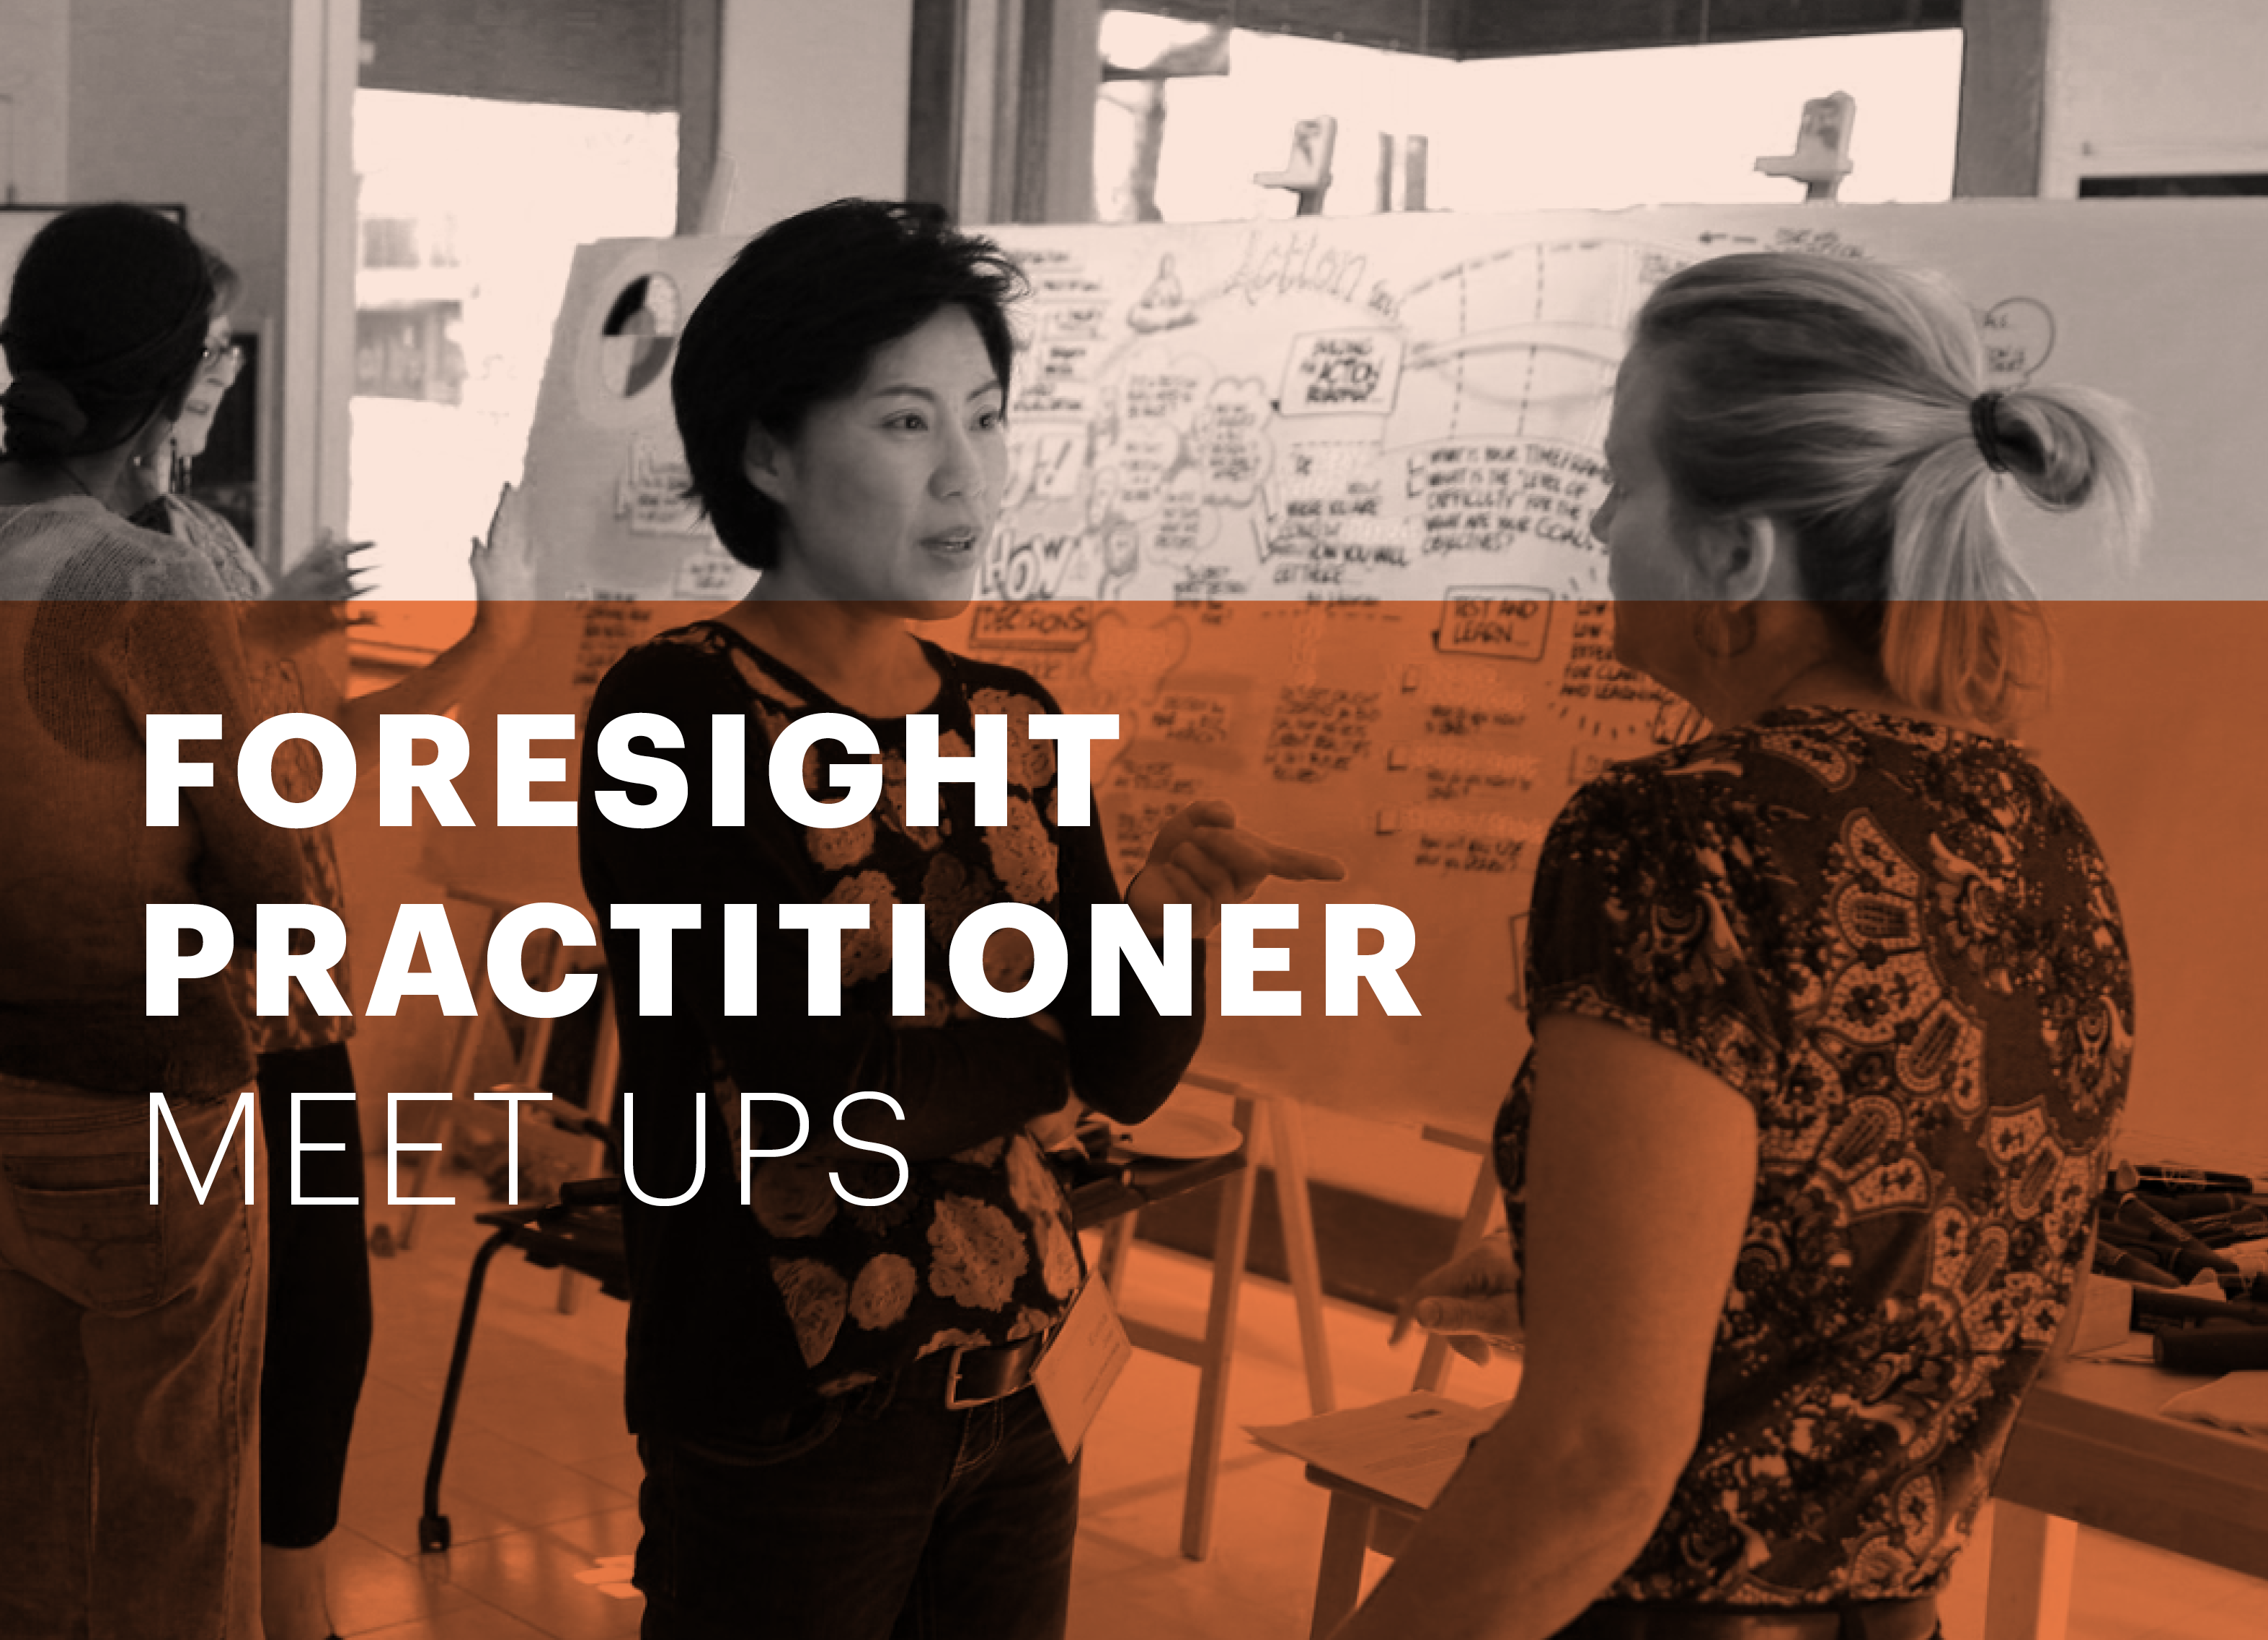 Foresight Practitioner Meet Ups